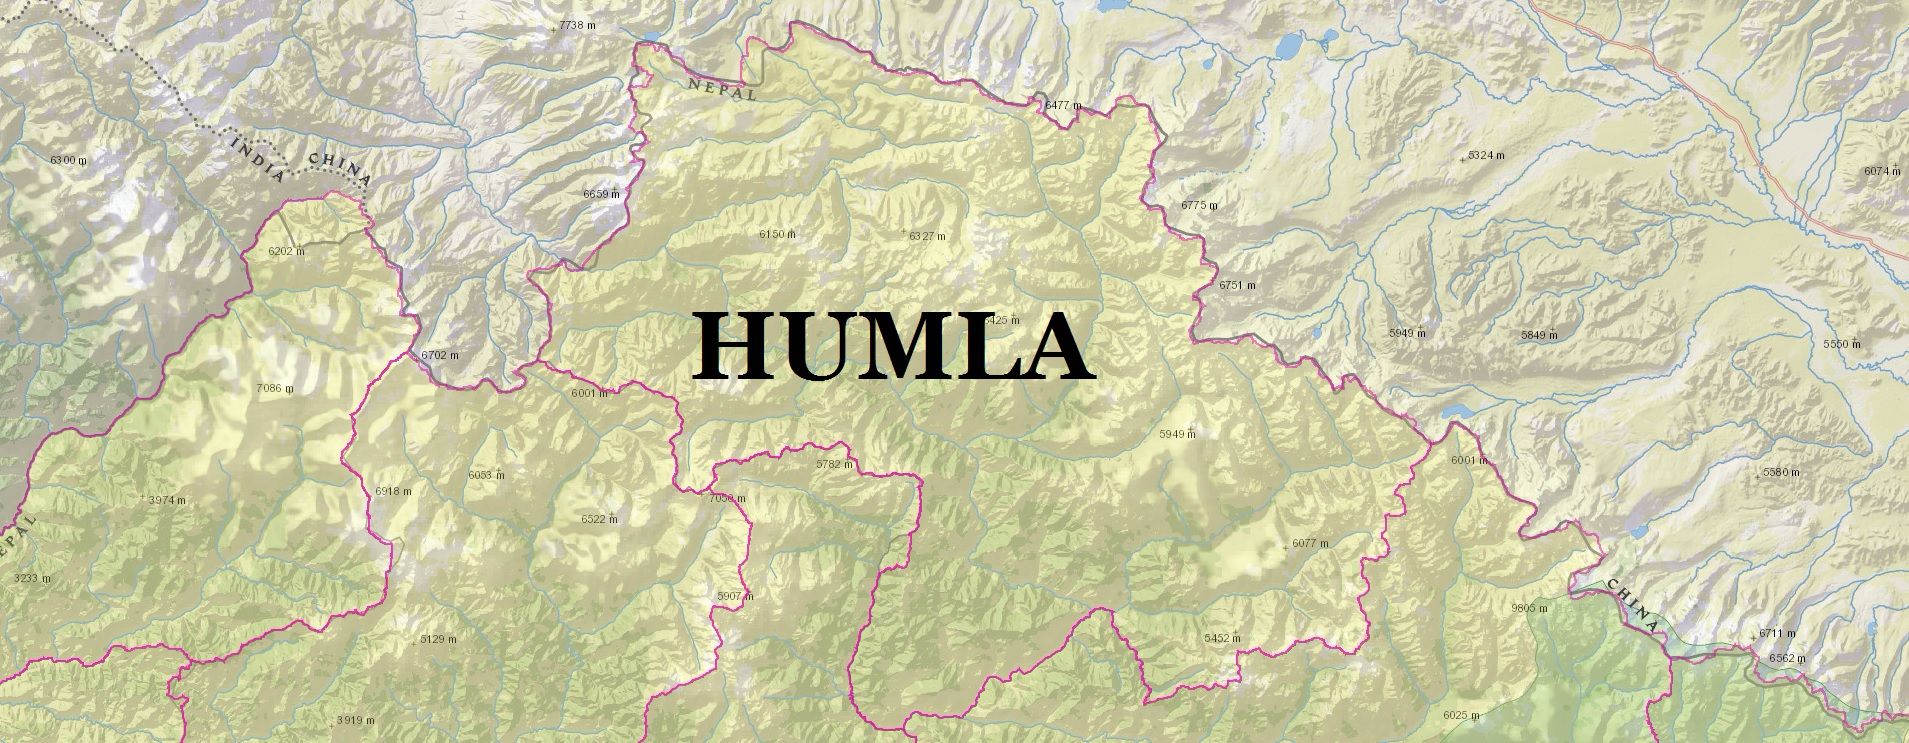 Humla to be linked to national highway